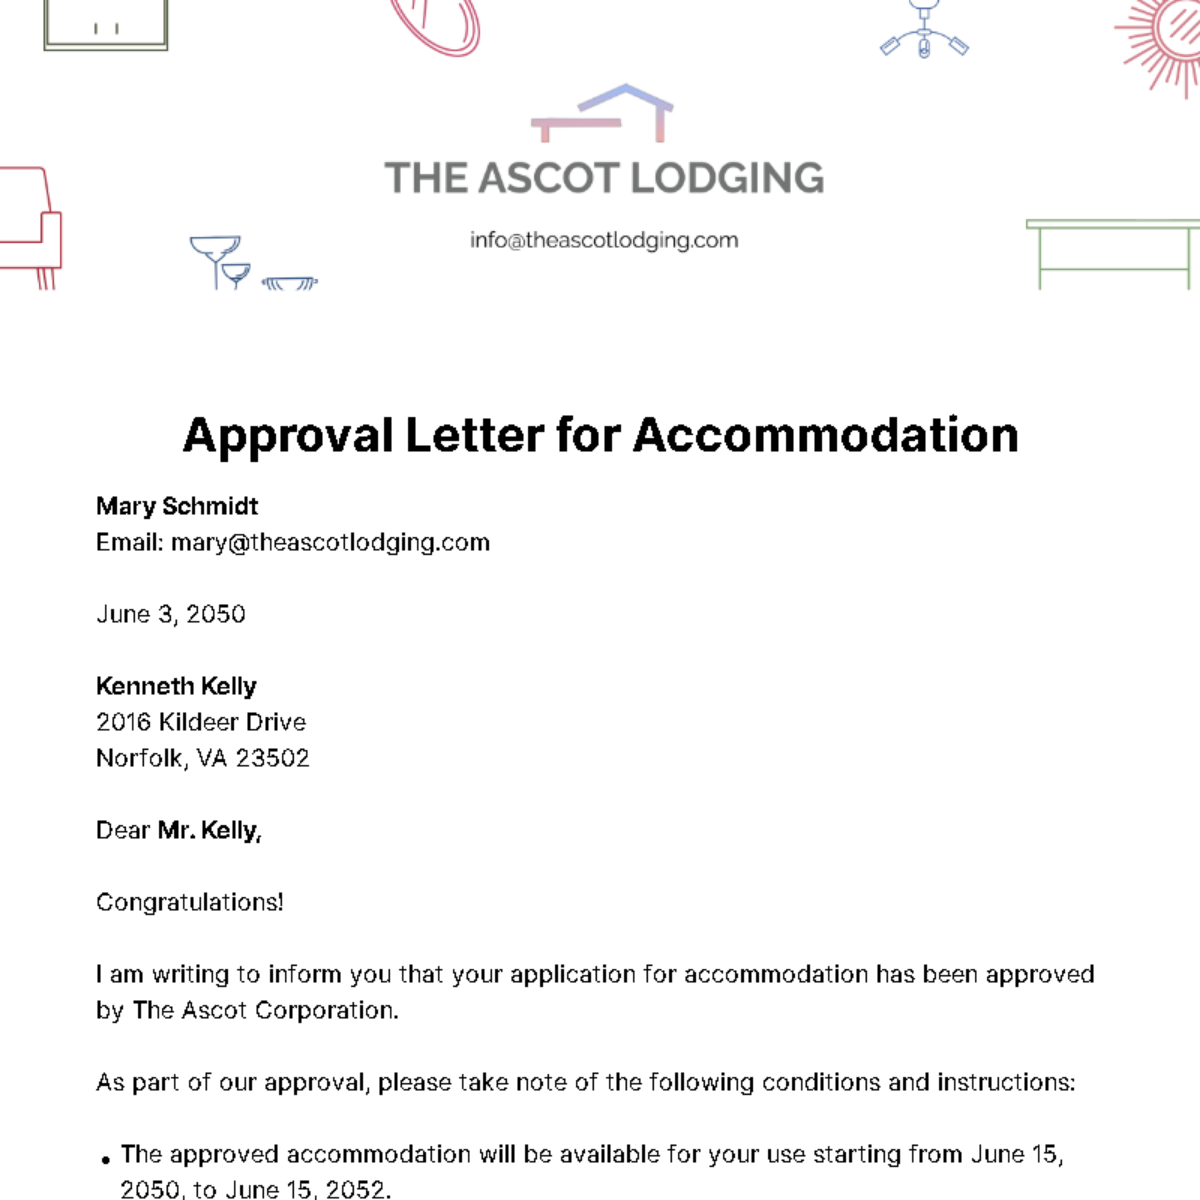 Approval Letter for Accommodation  Template